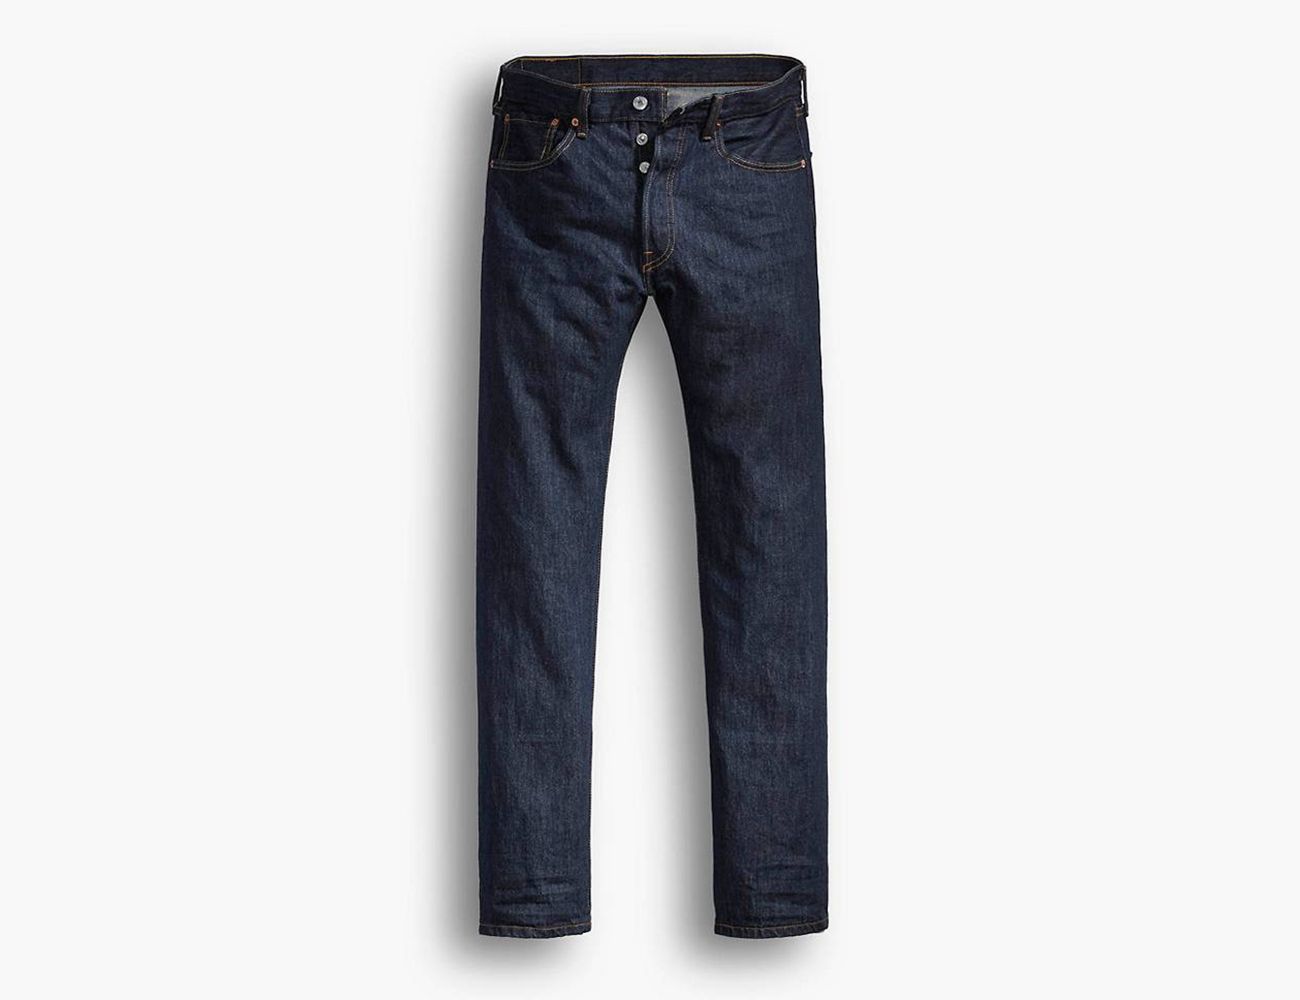 Levi’s 501 Review: Are the Affordable Classic Jeans Still Good?